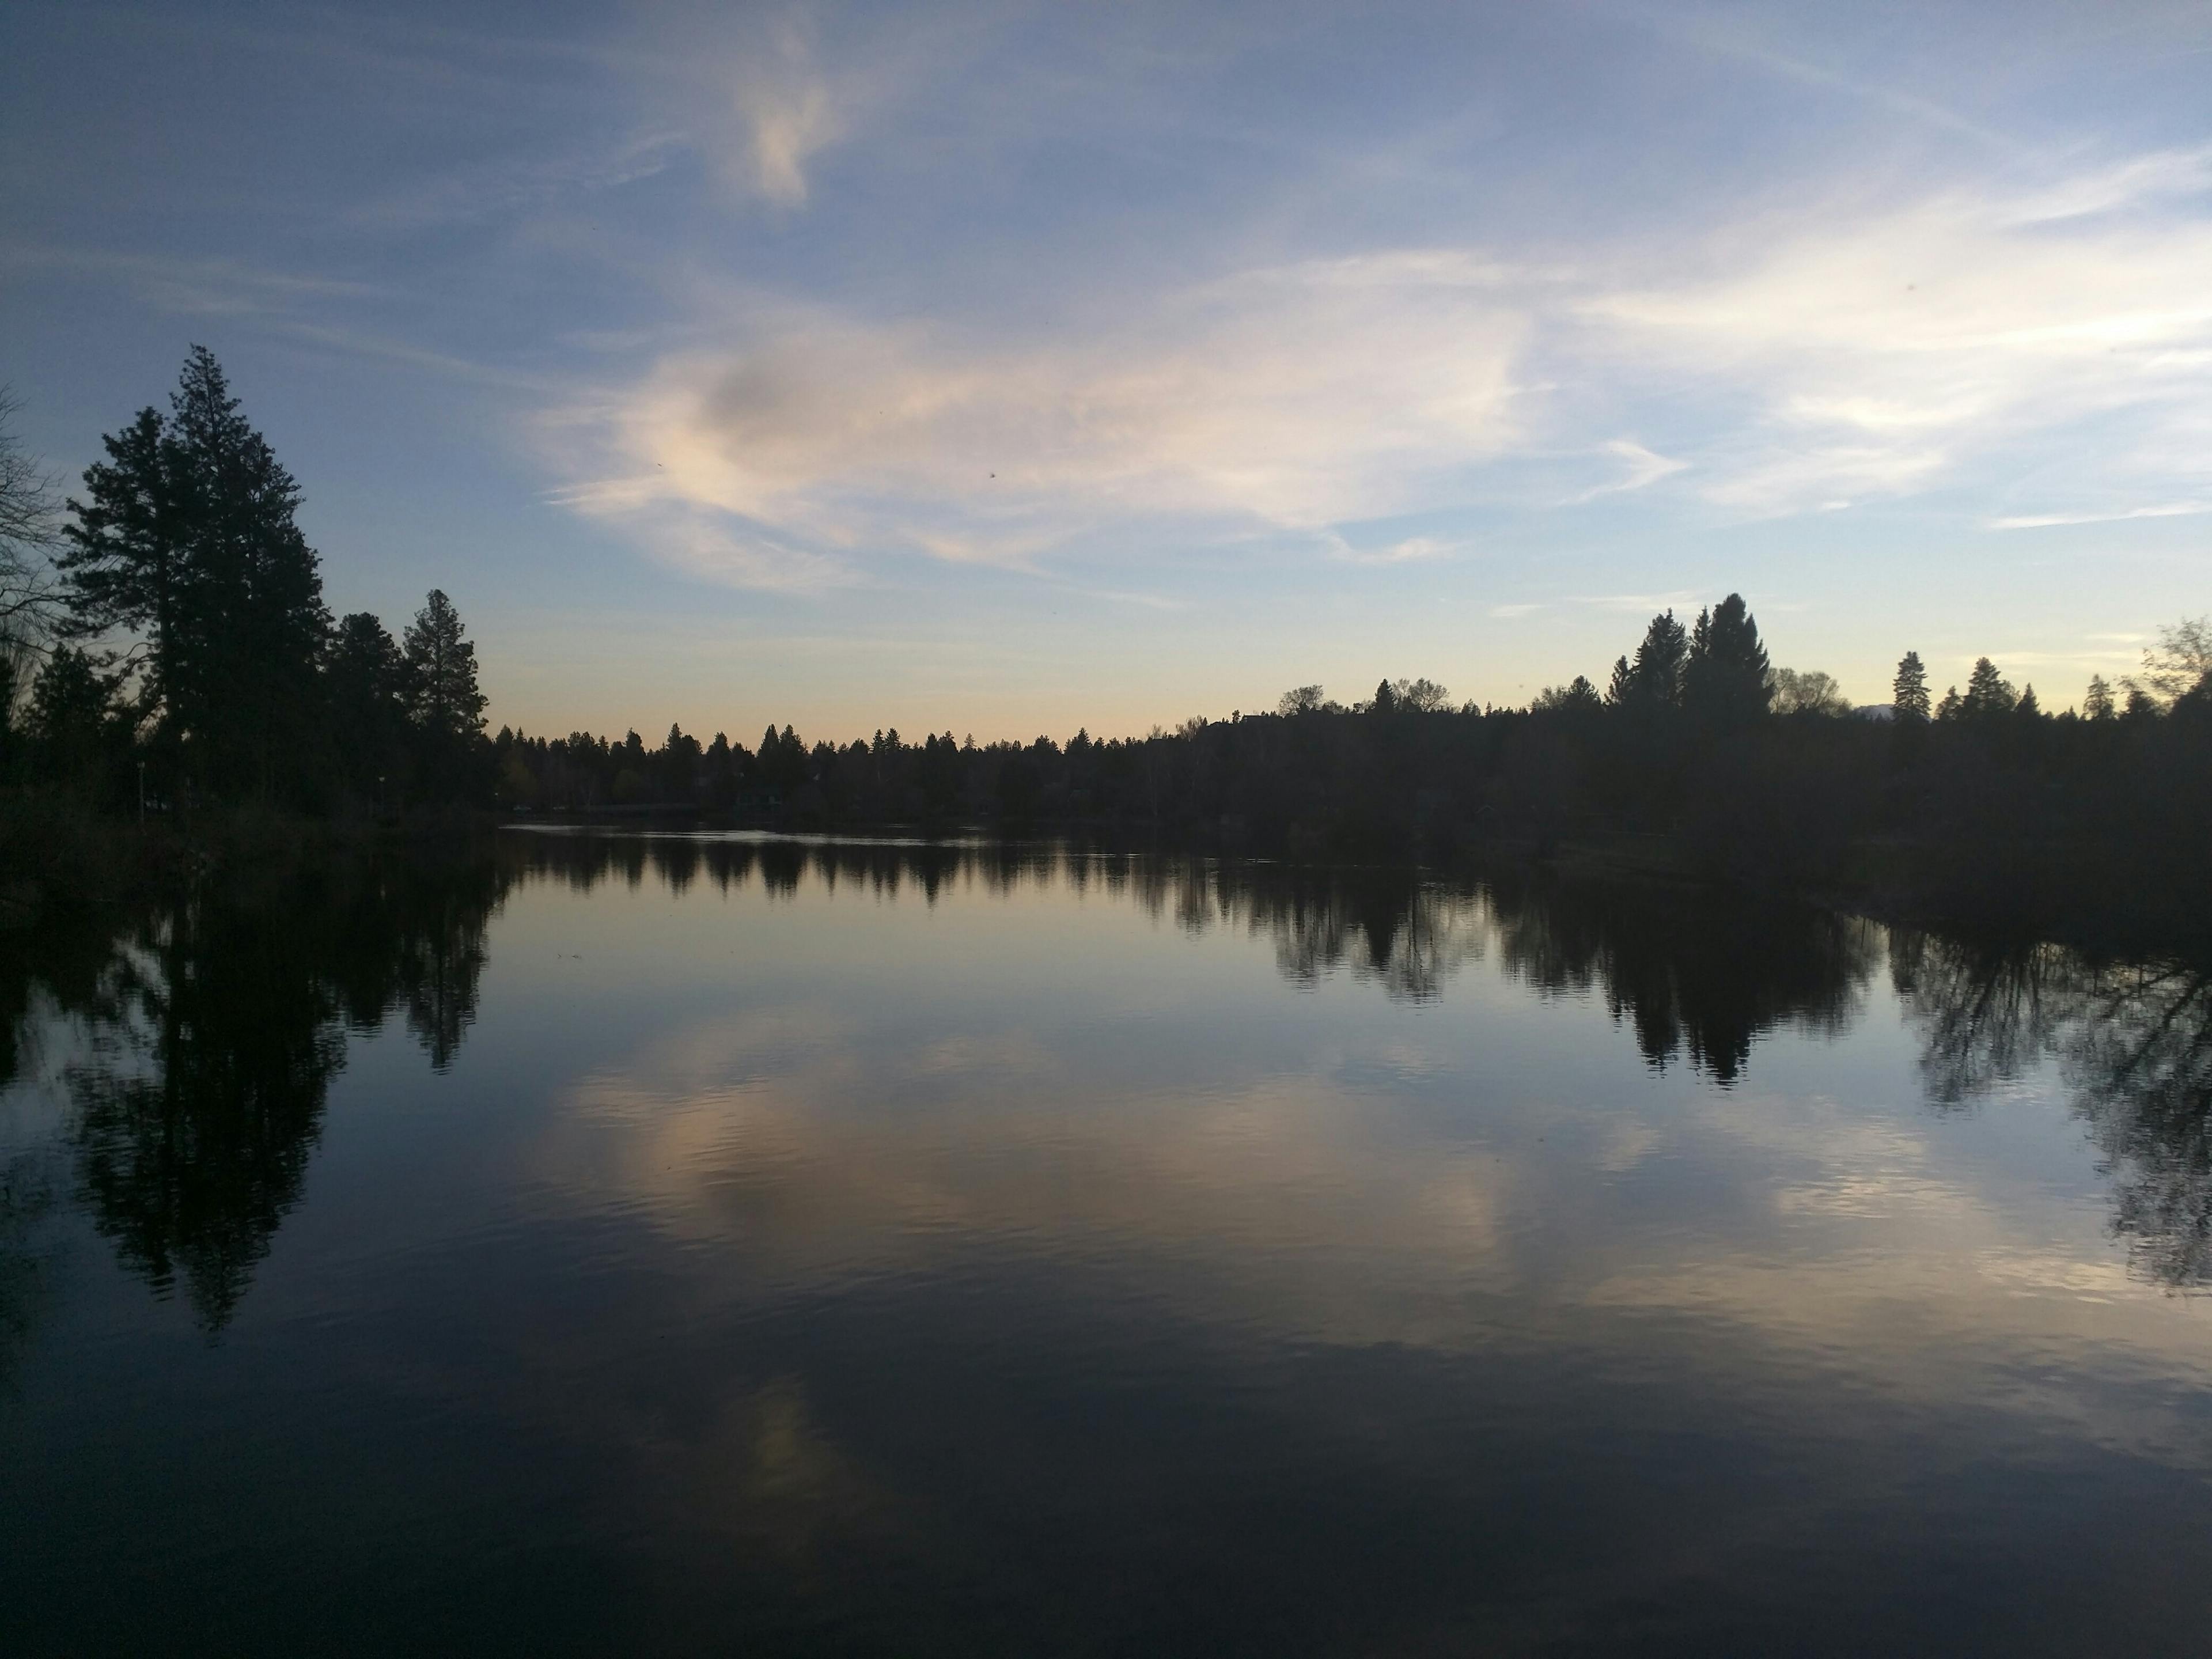 A lake in Snohomish County known as Little Lake Martha